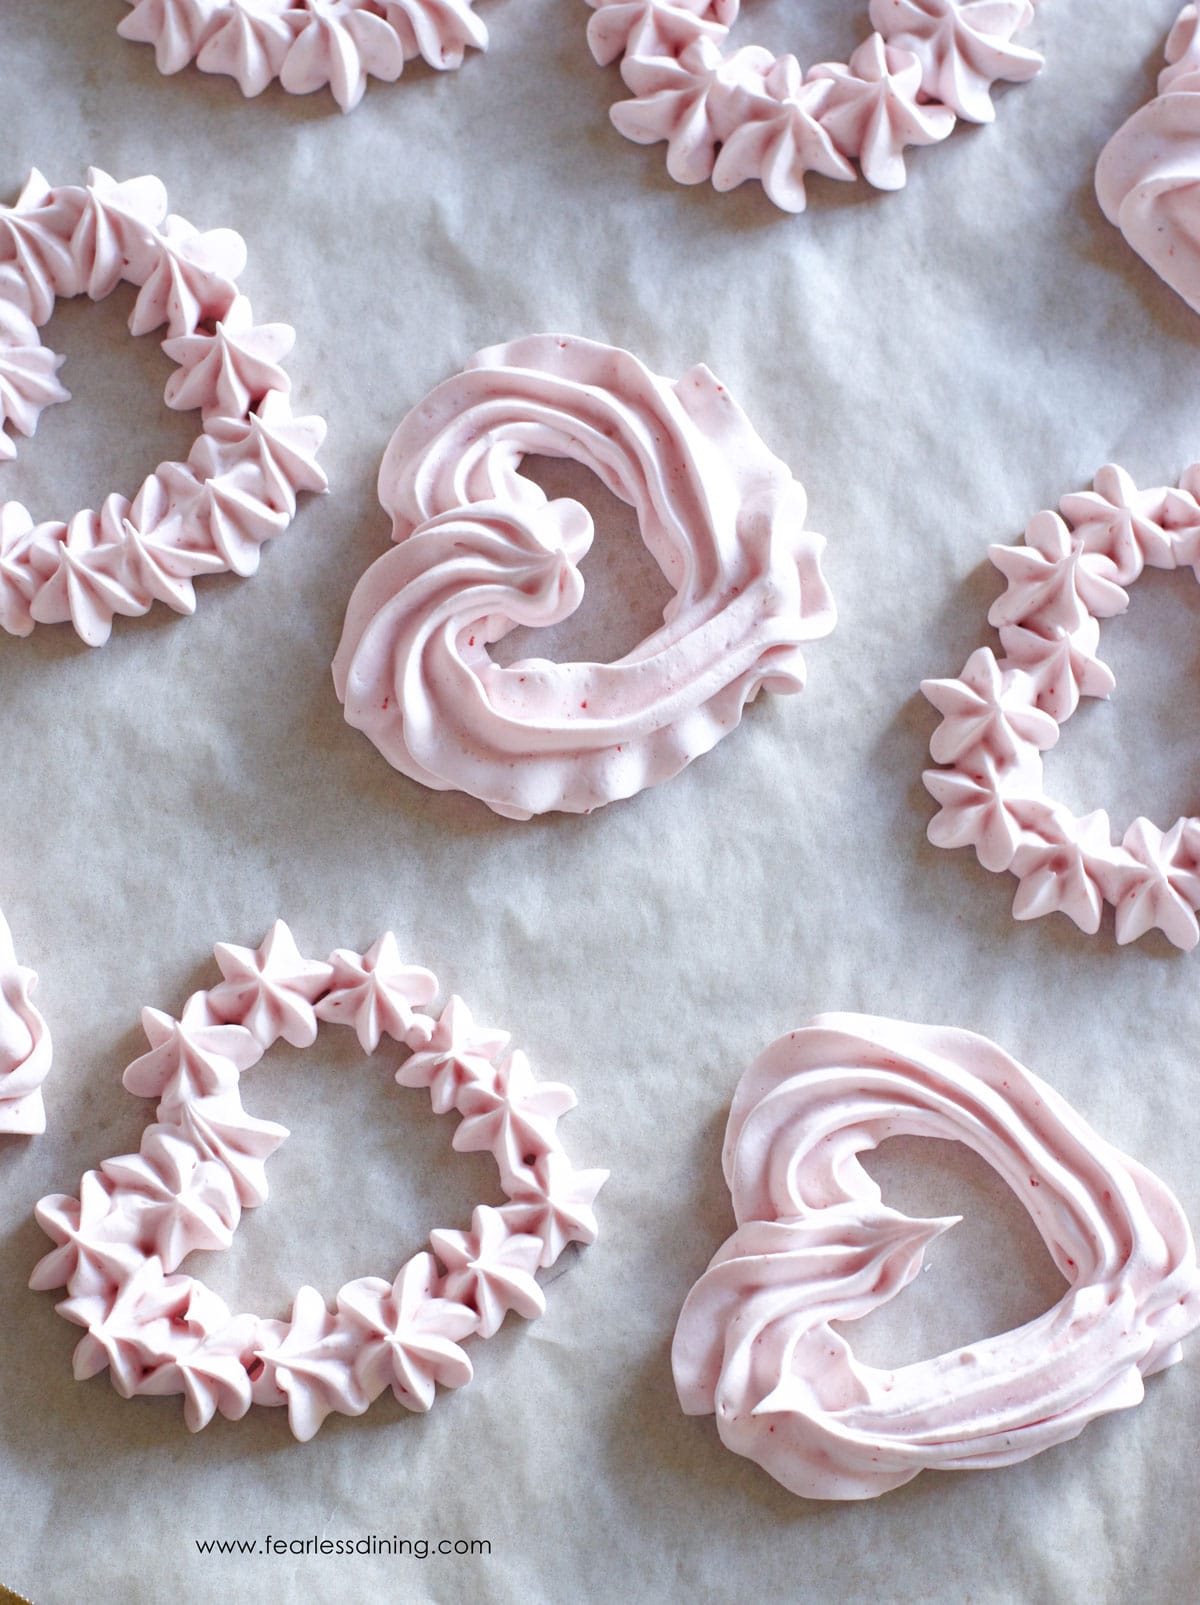 strawberry meringues piped into heart shapes on a baking sheet